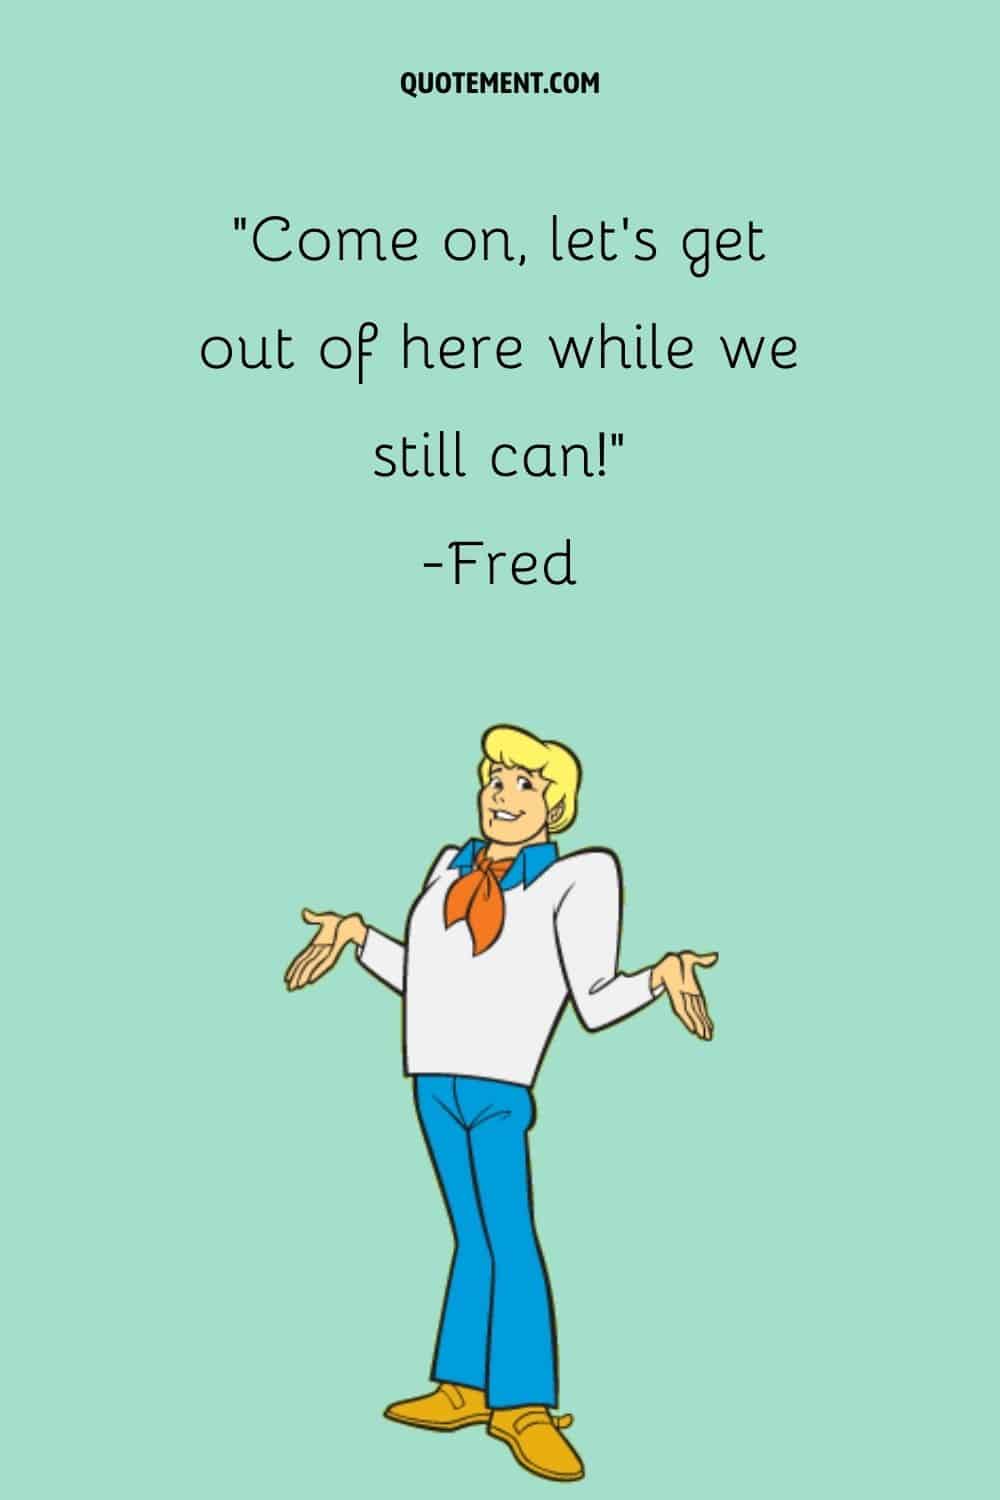 image of Fred representing famous Fred quote
